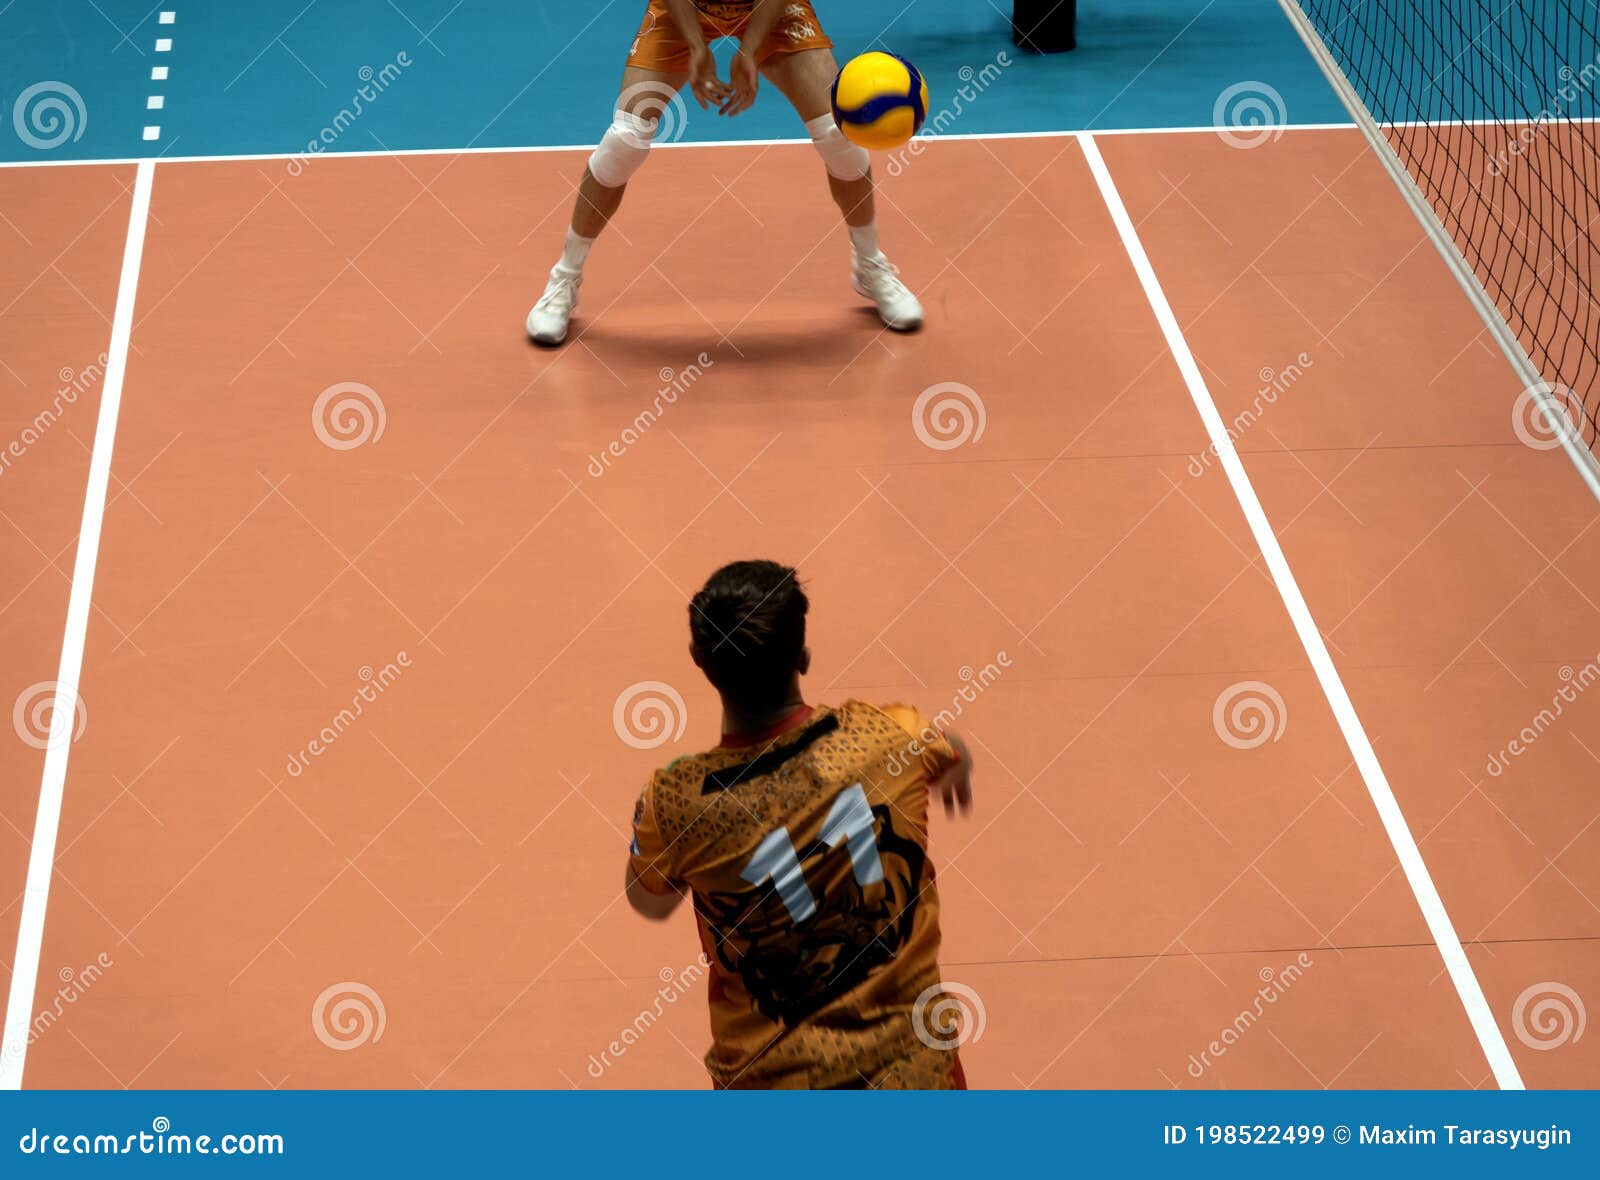 Free Images : play, train, young, training, exercise, together, movement,  competition, sporty, championship, network, fairness, athlete, active, ball  sports, playing field, team sport, volley, sports hall, team sports,  volleyball field, volleyball net